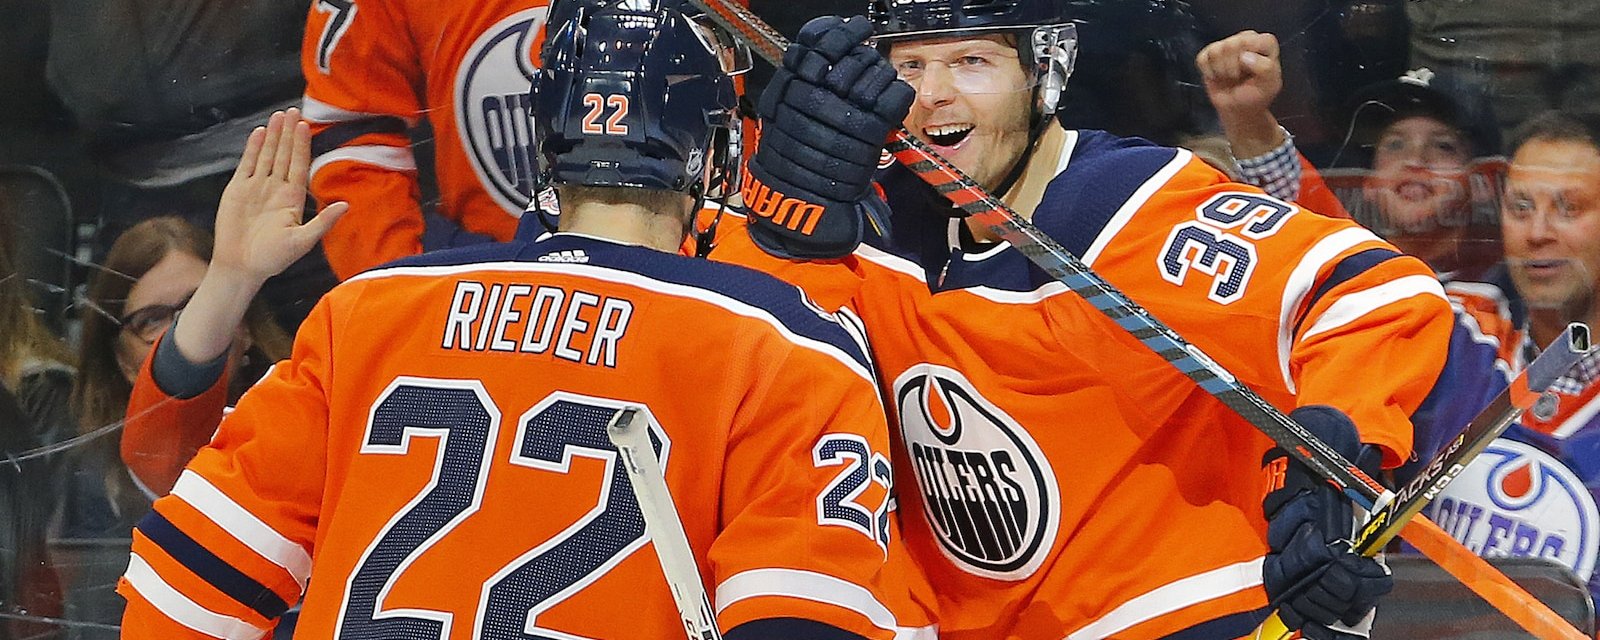 Oilers gang up on CEO Nicholson who slammed Rieder yesterday in meeting with season-ticket holders